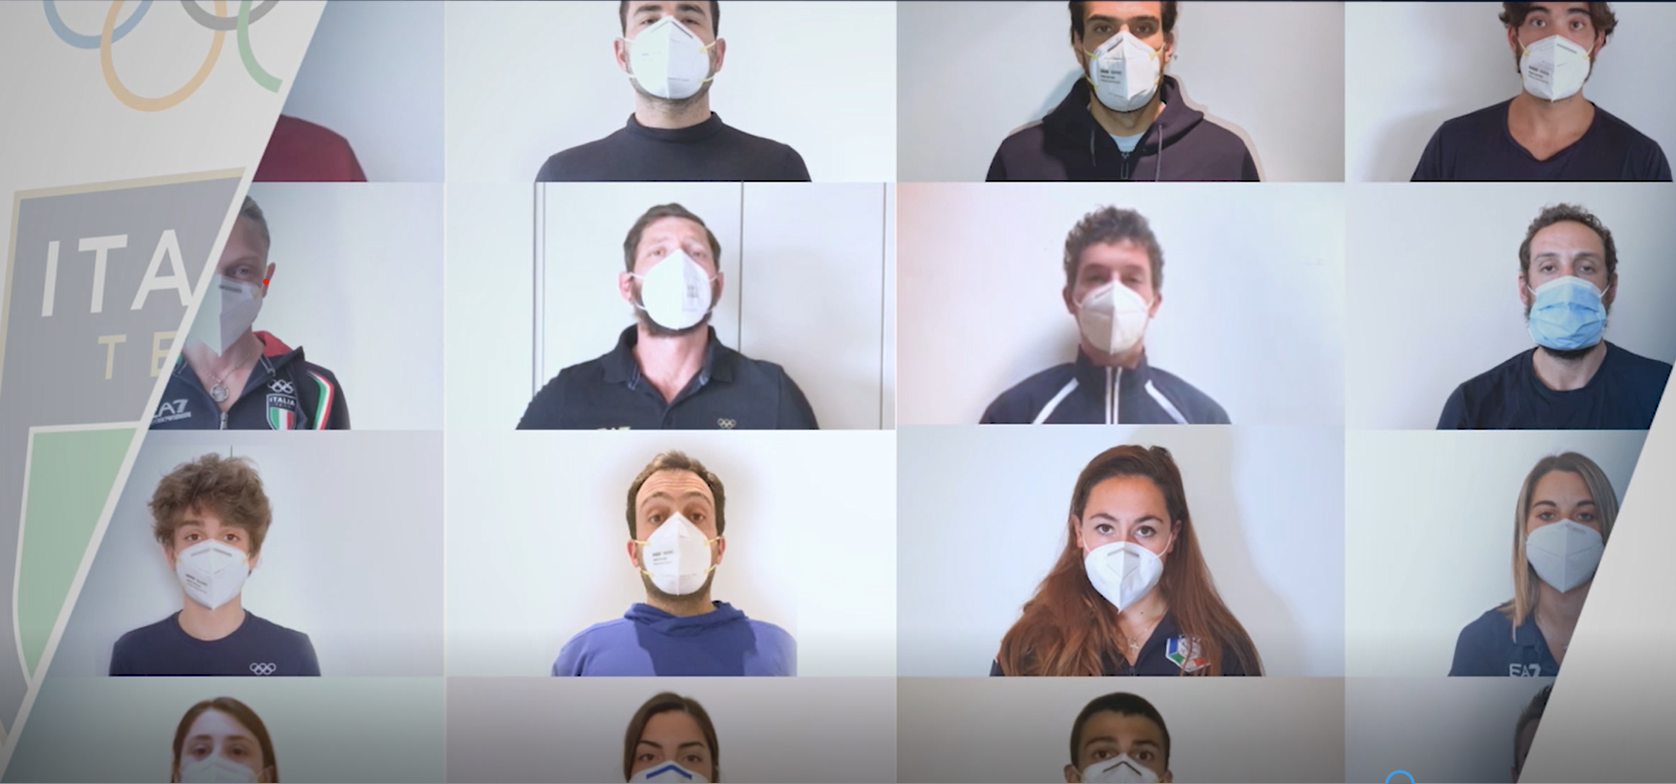 #Iplayprotected, video of Italia Team’s athletes for the new phase in fight against the virus